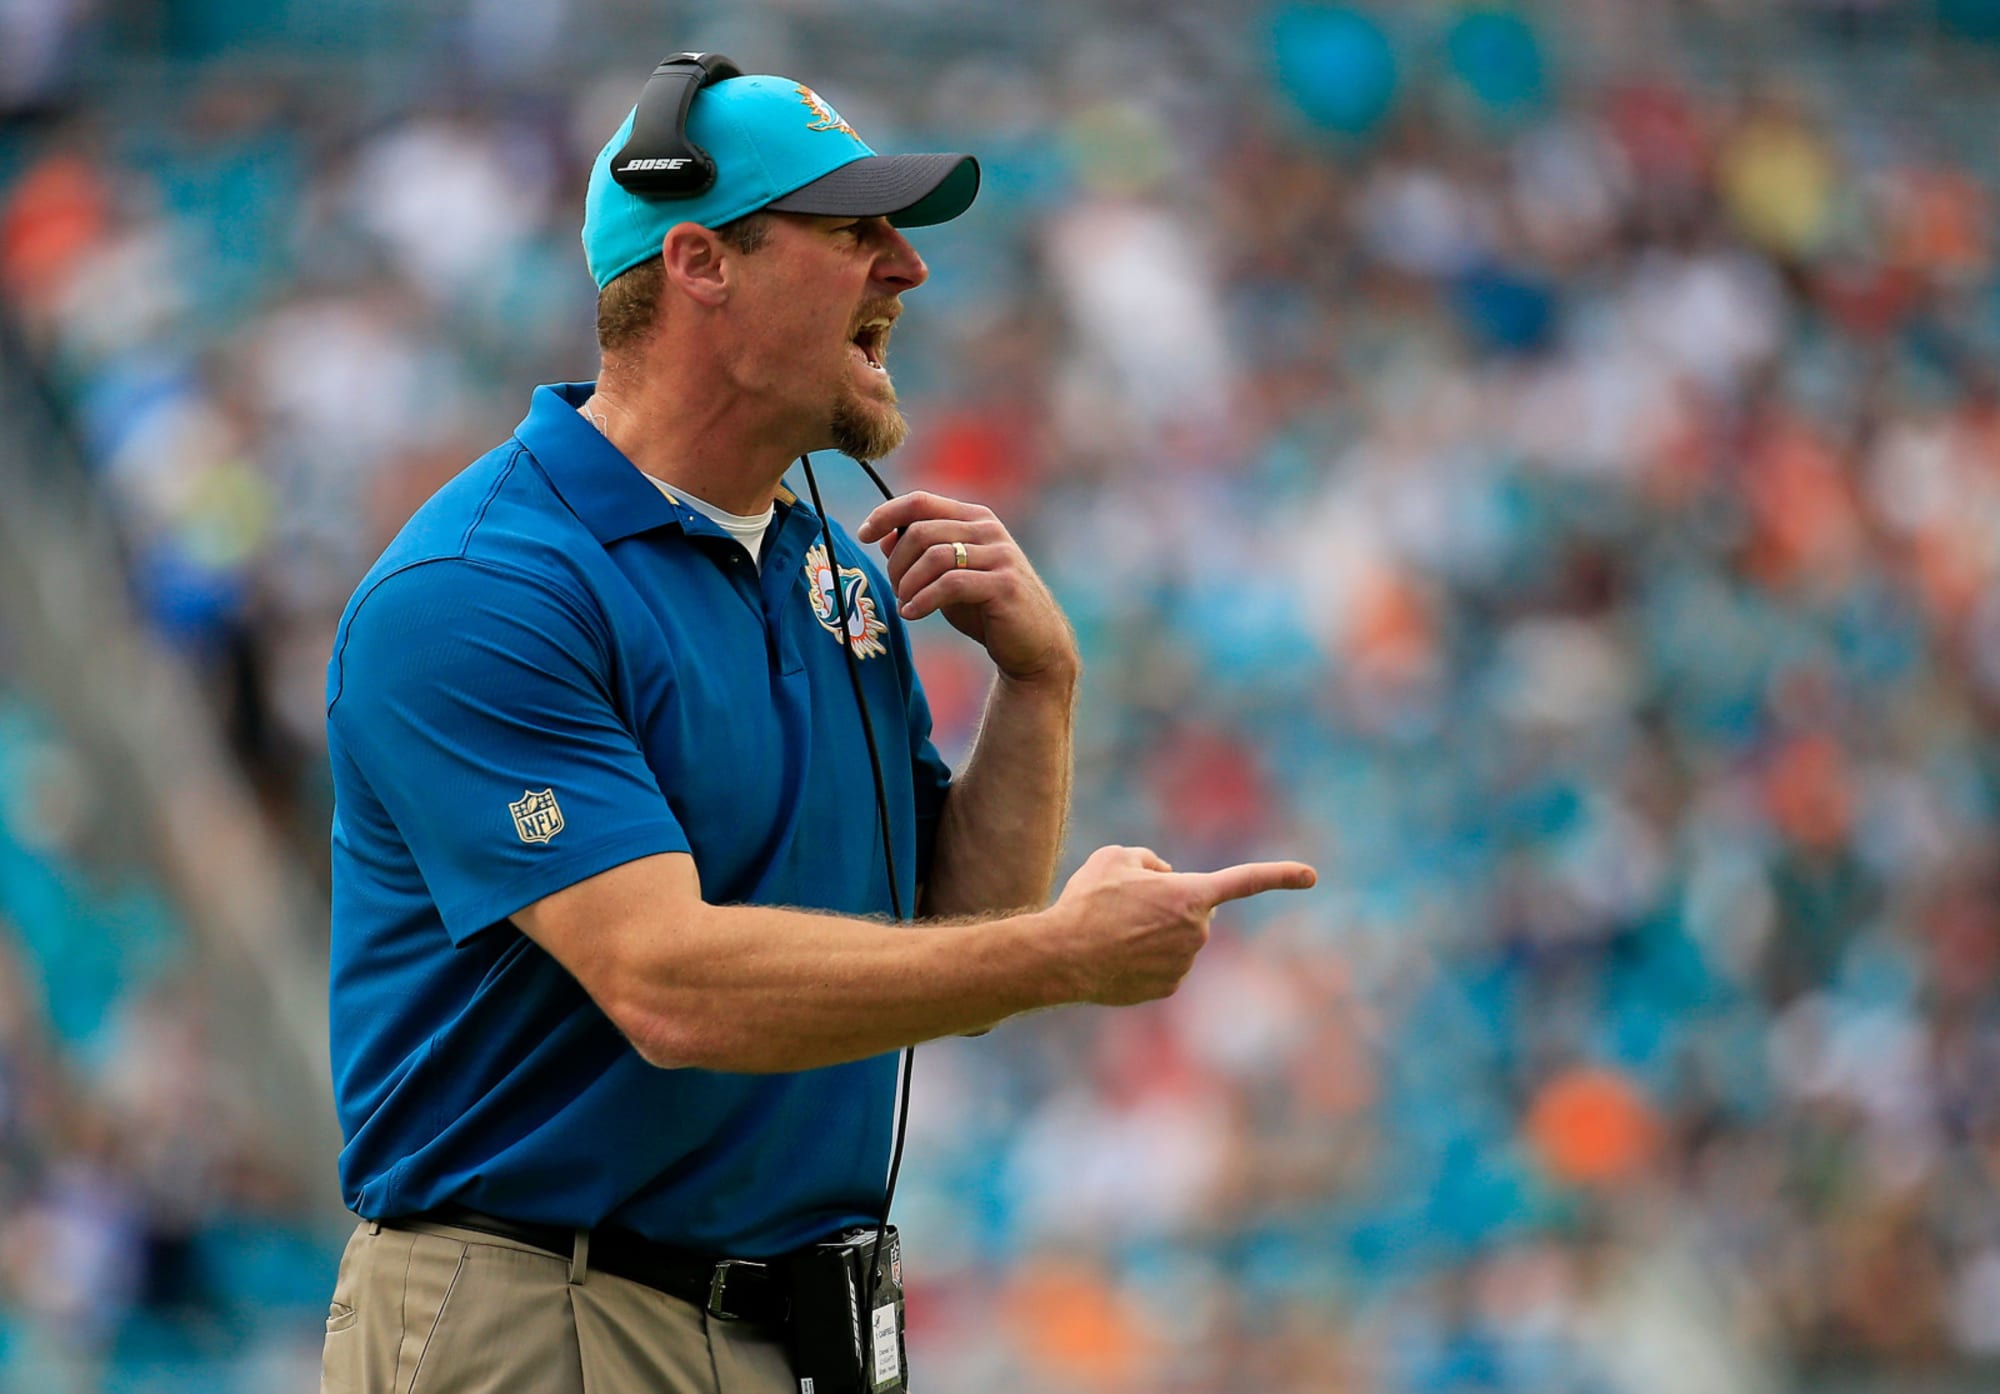 Former Miami Dolphins interim HC Dan Campbell set to take over Lions